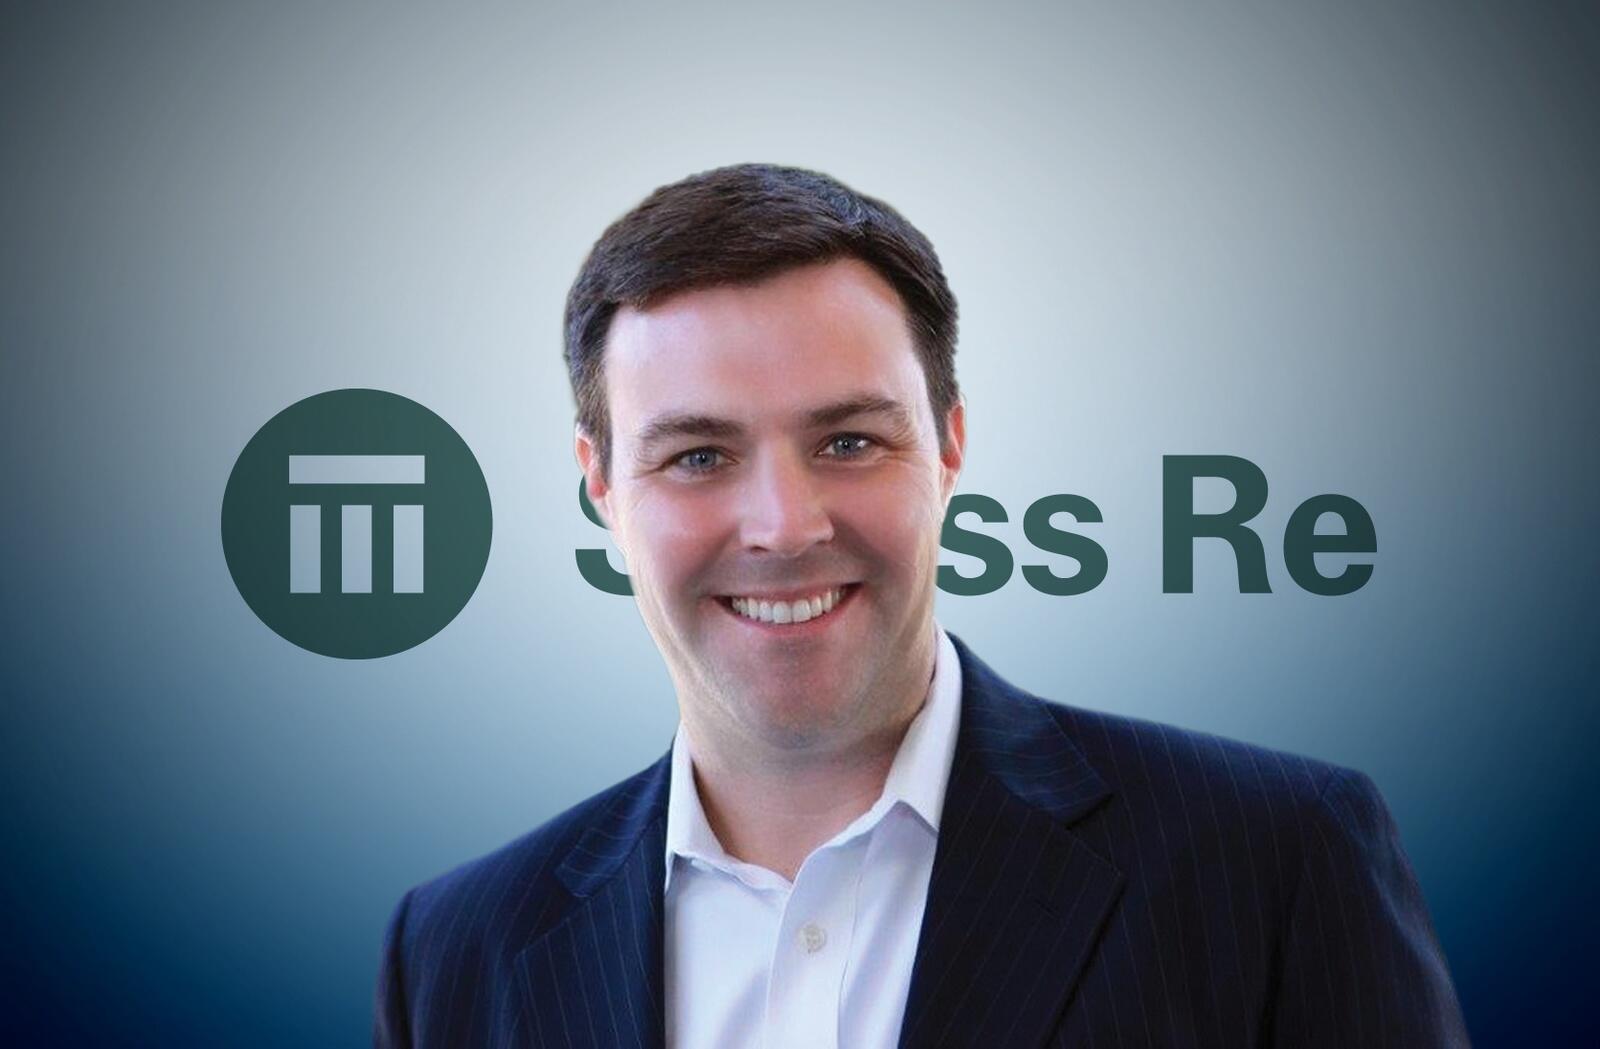 Keith Wolfe – Swiss Re